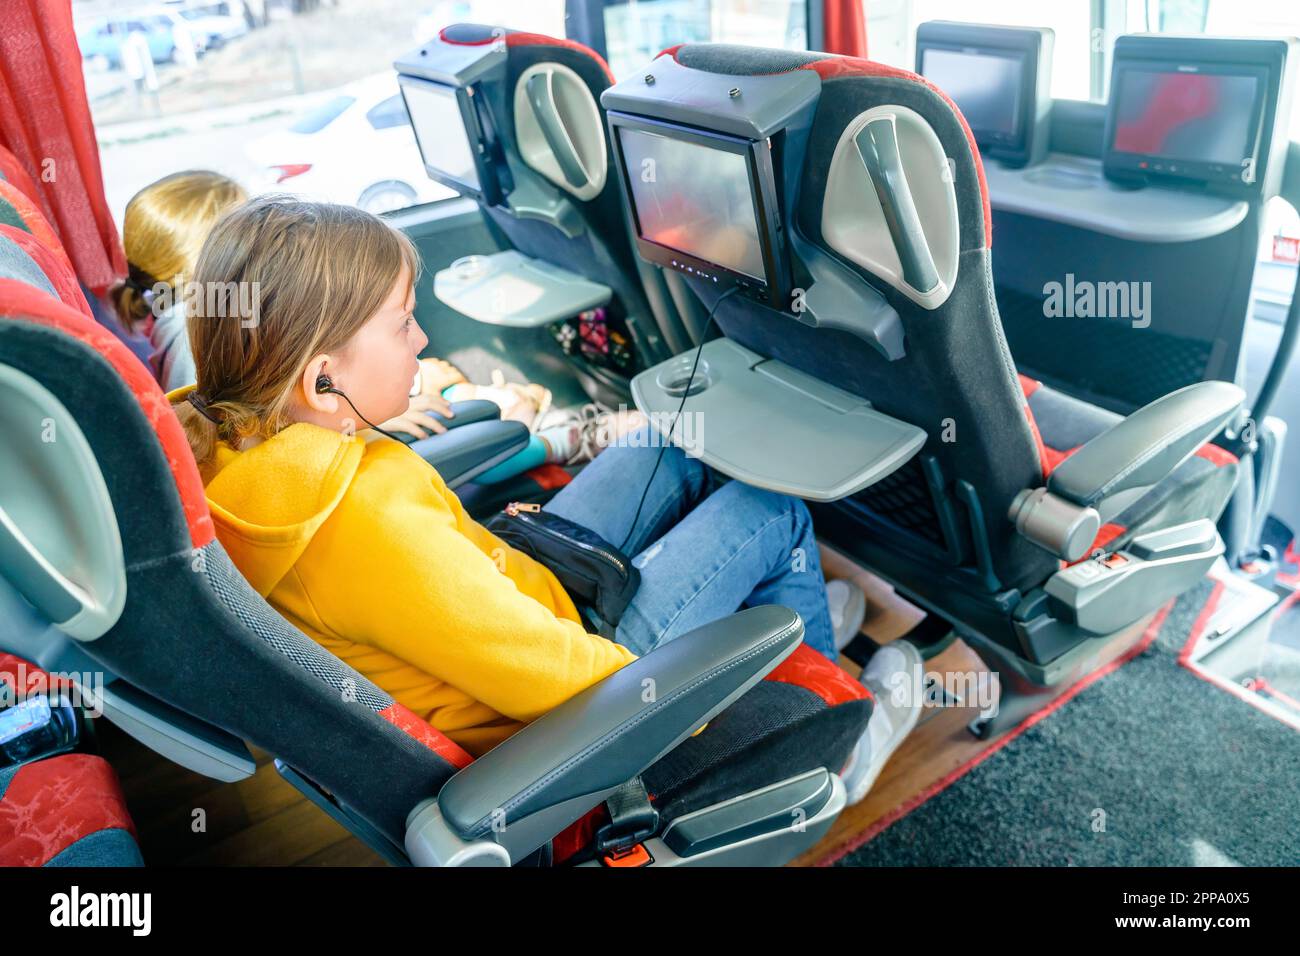 Bus road traveling. Girl kid rides on large comfortable sightseeing excursion bus. Watching movie cartoon on screen in chair. Entertainment media syst Stock Photo